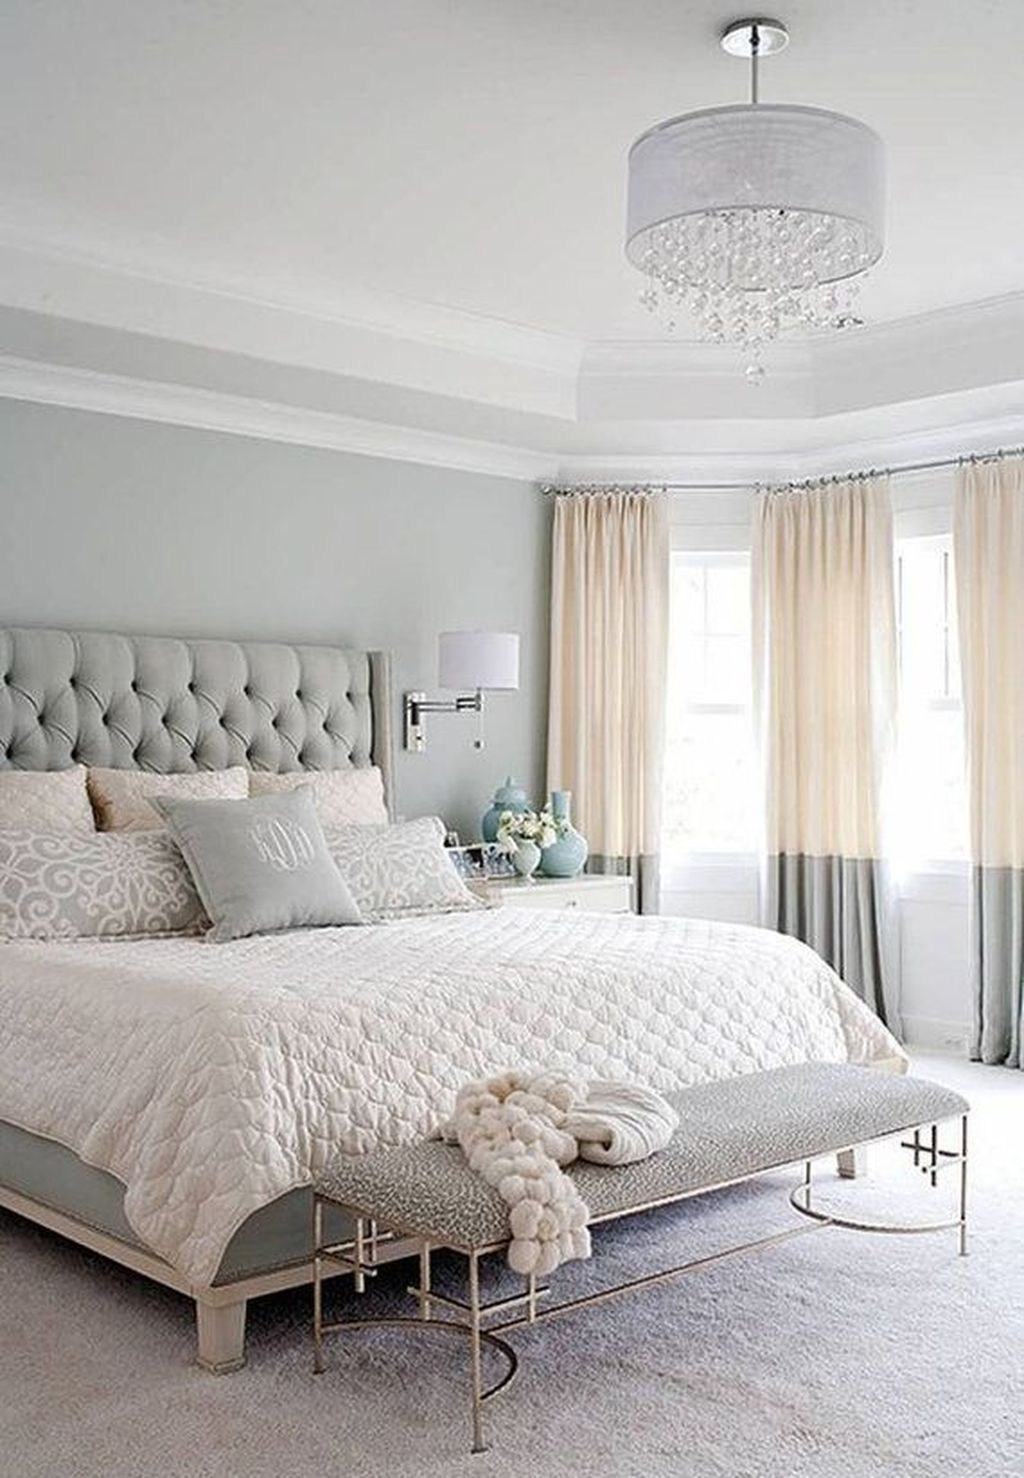 Admiring Bedroom Decor Ideas To Have Right Now 25